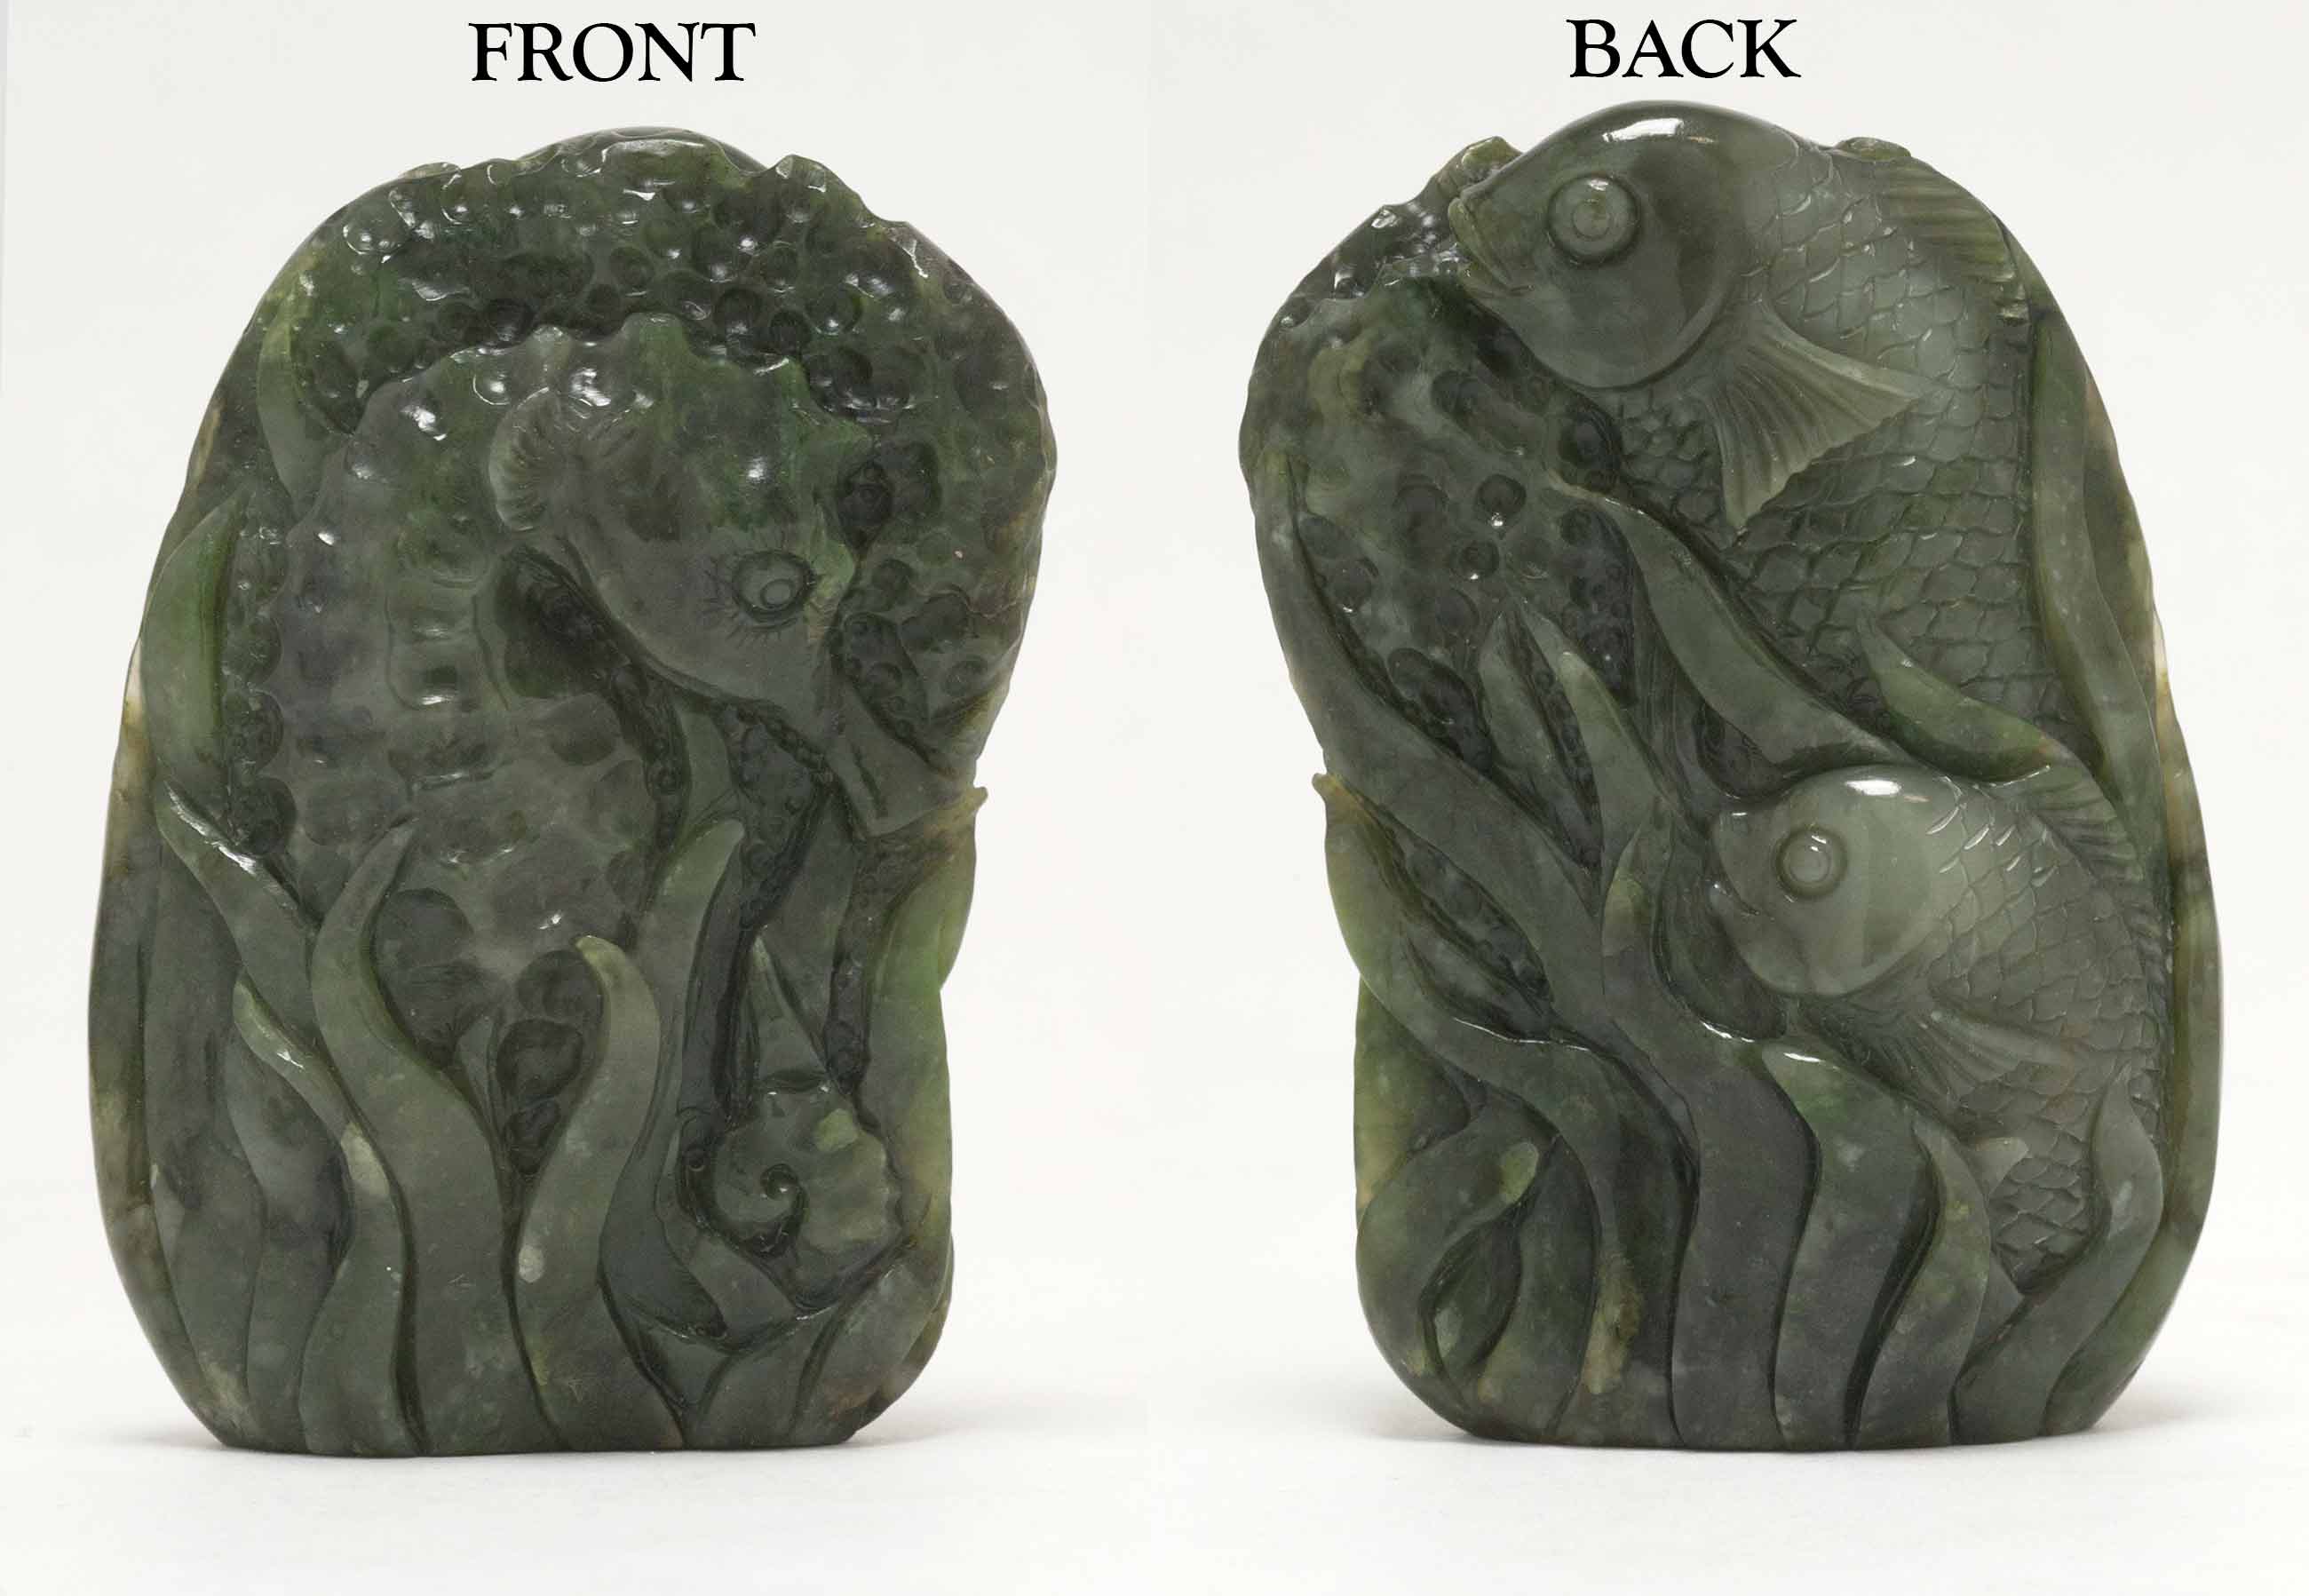 A large seahorse carved out of Big Sur jade from California's coast.